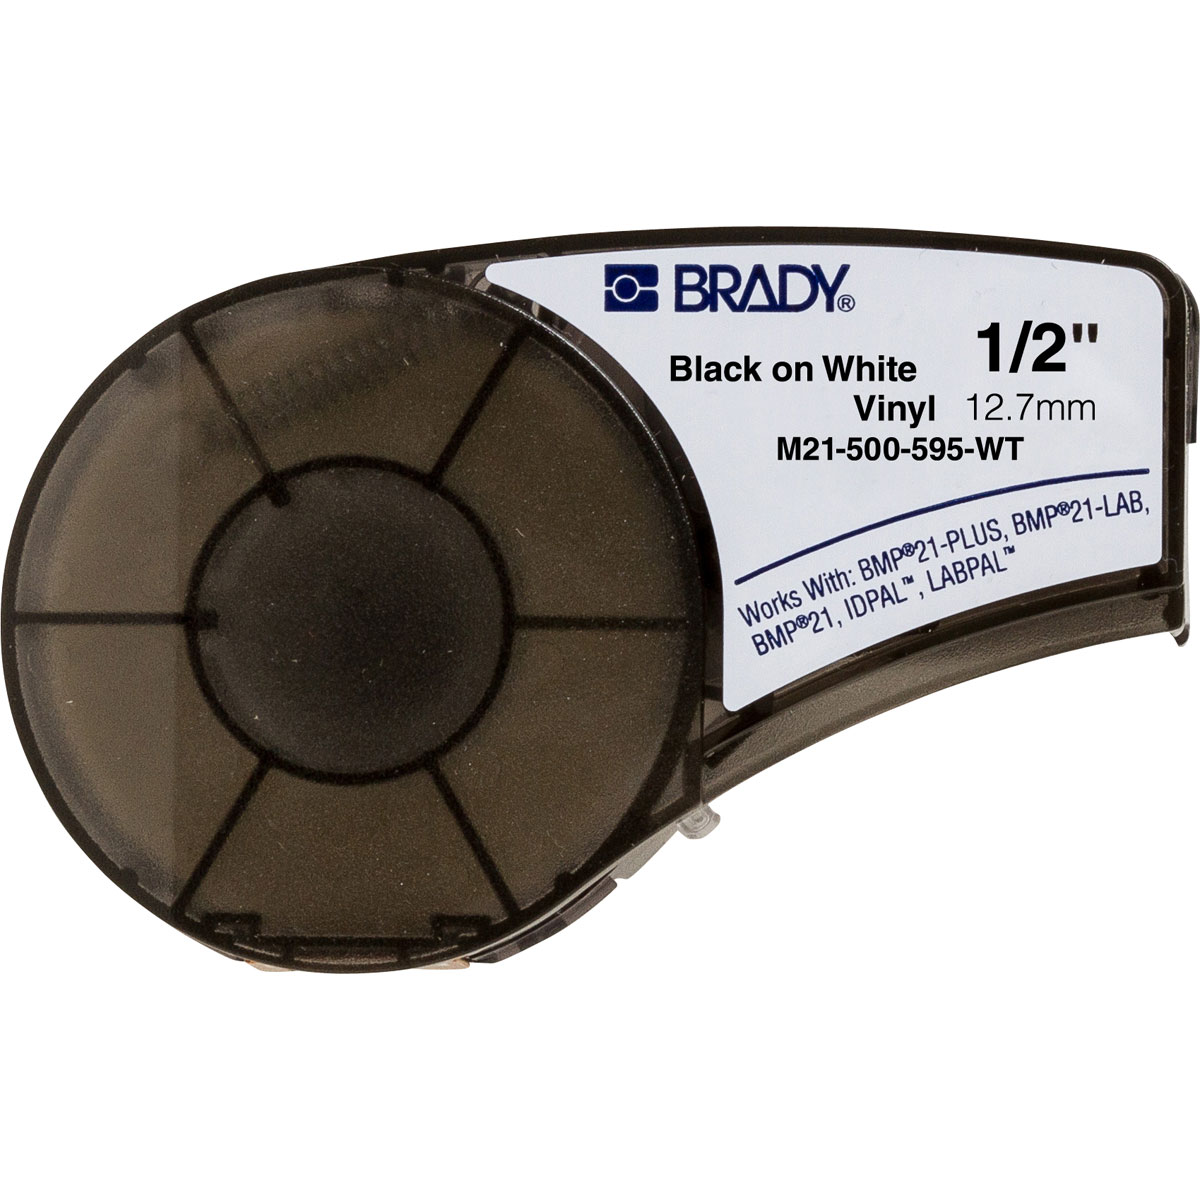 Brady® M21-500-595-WT BPM®21 Label Marker Cartridge, 21 ft L x 1/2 in W, For Use With BMP® 21 PLUS Portable Label Printers, IDPAL™ and LABPAL™ Handheld Label Maker, B-595 Vinyl, Black on White